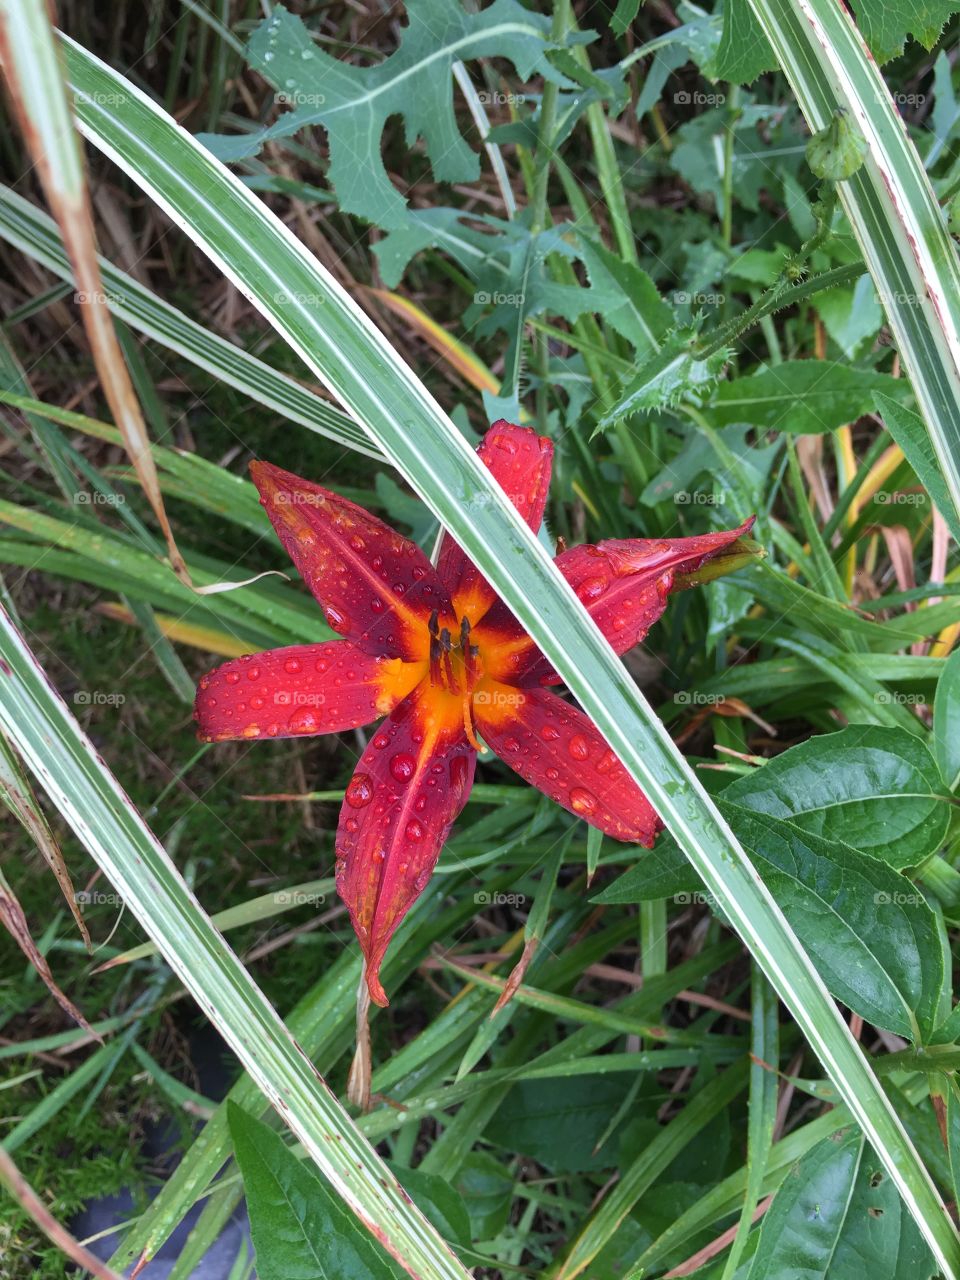 Tiger Lilly after the rain